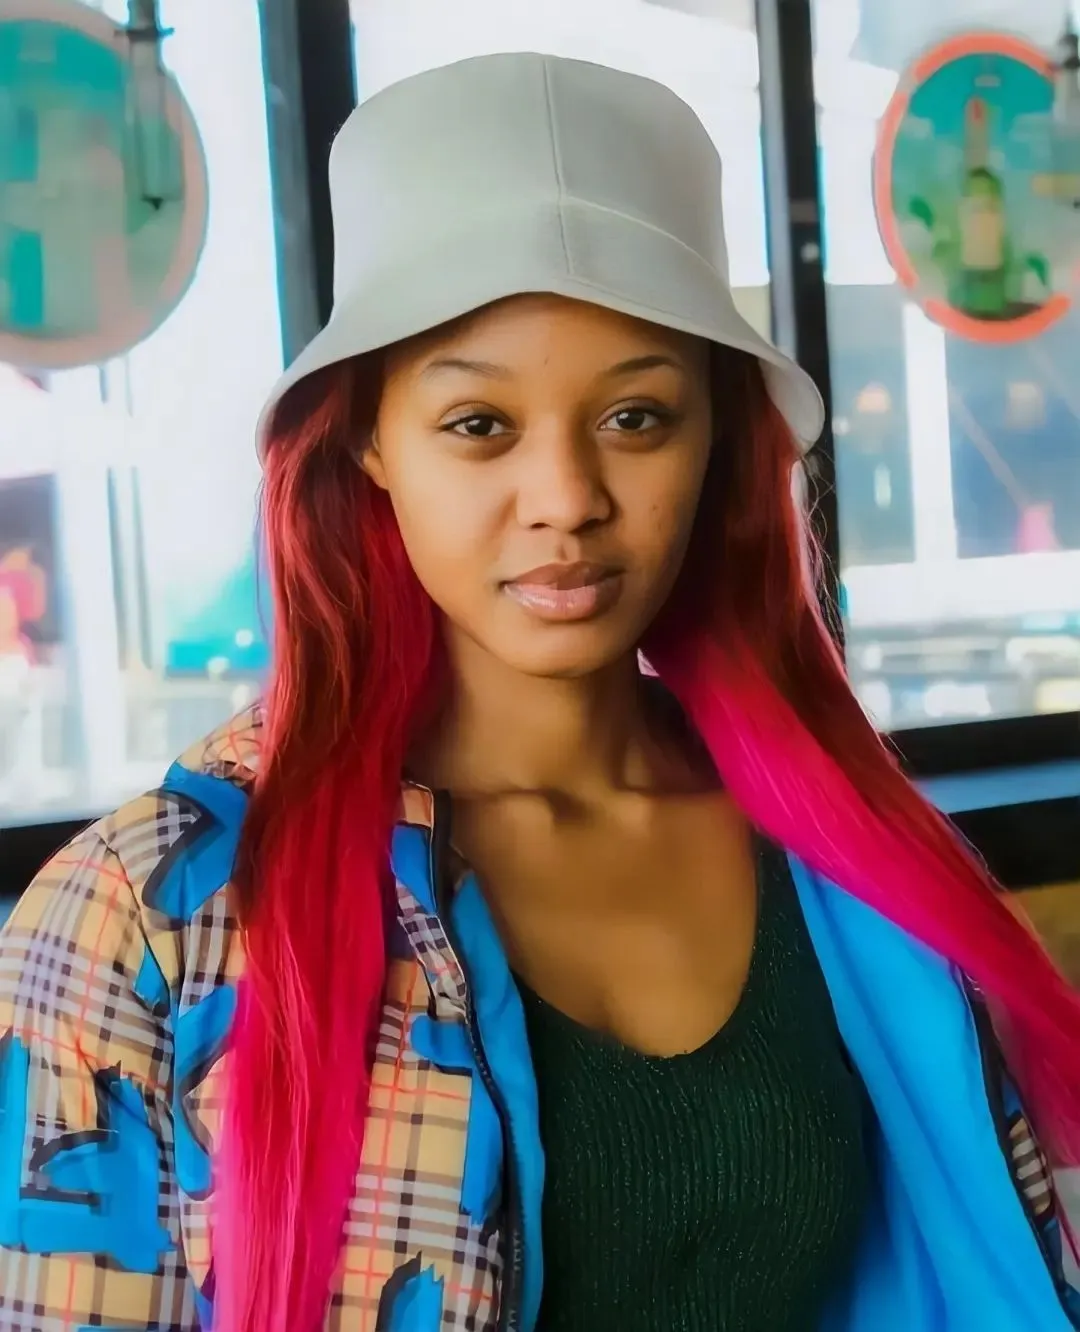 Babes Wodumo Comes Back To Instagram After 1 Year With A Tribute To Mampintsha